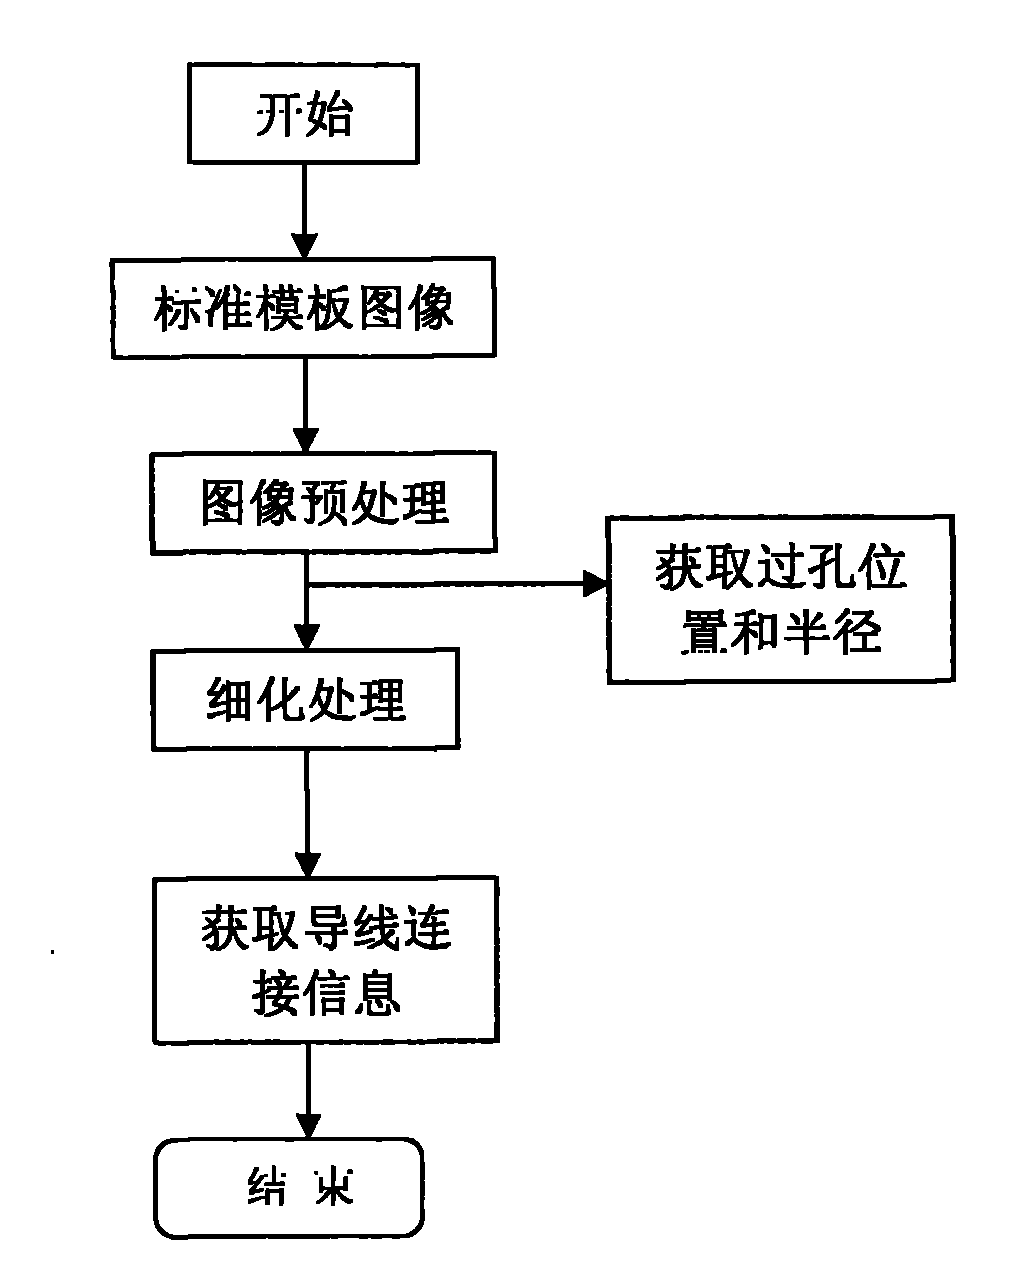 Connection table based automatic optical detection algorithm of printed circuit board